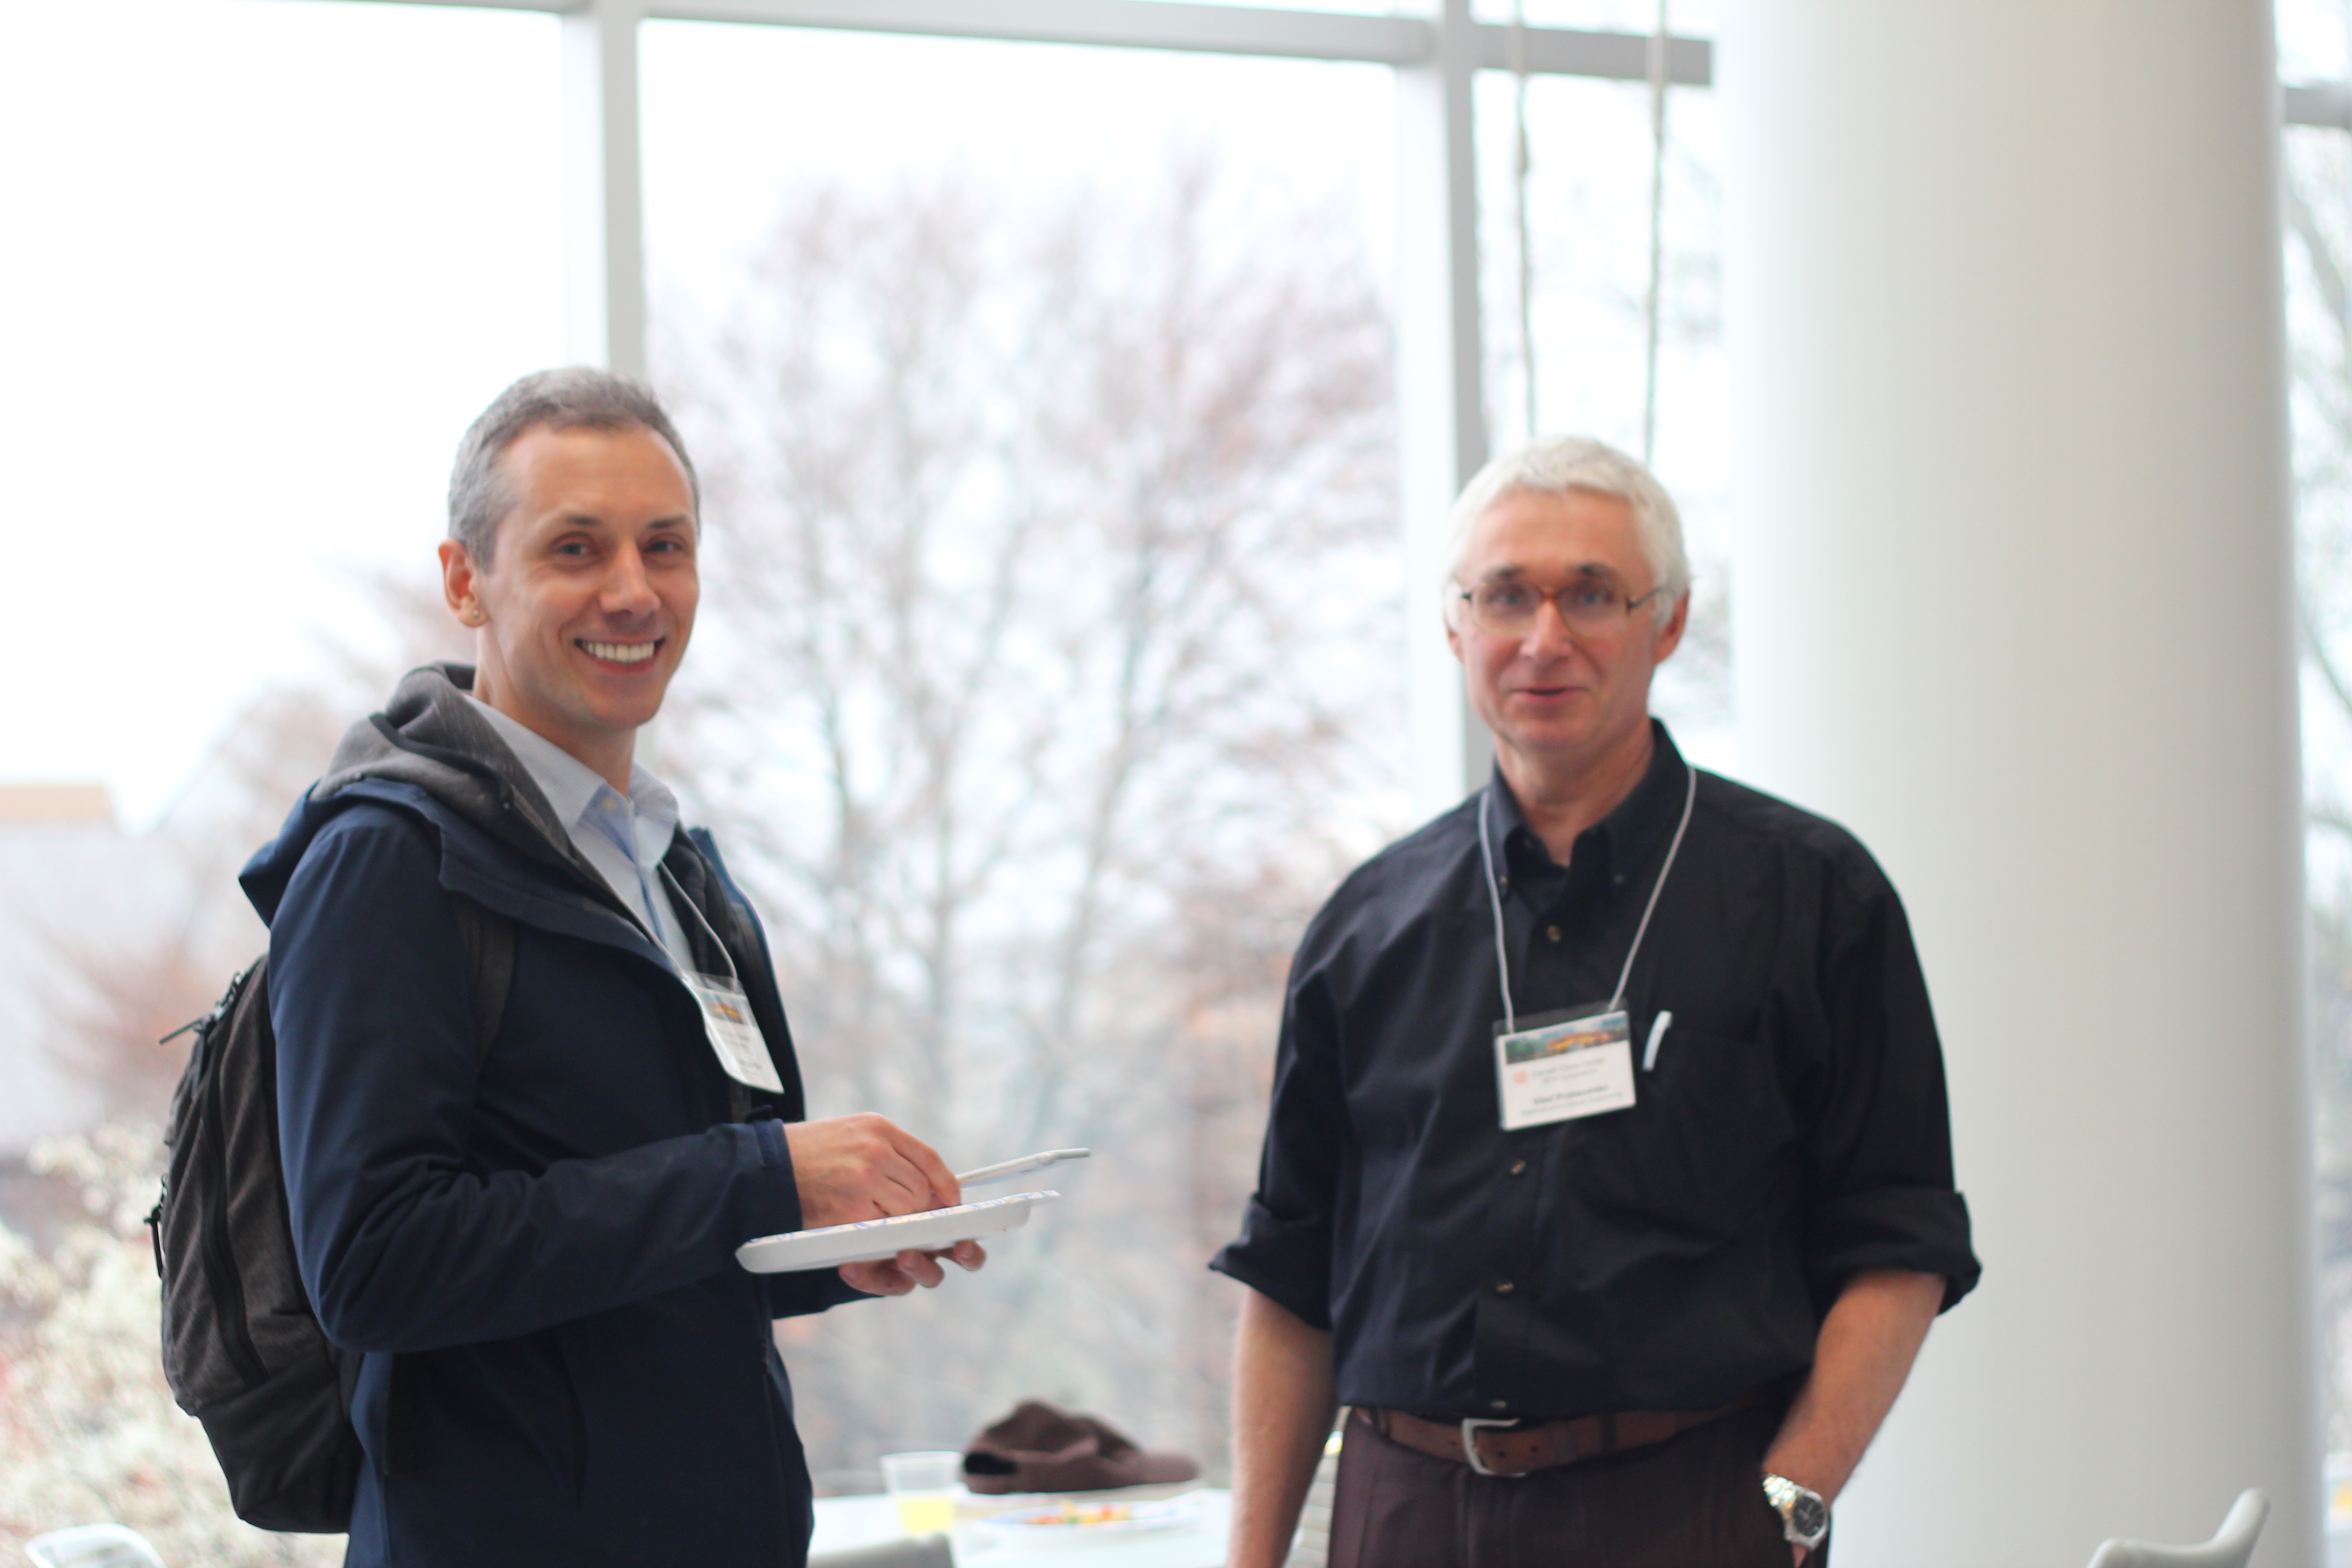 Alex Kudryavtsev (Natural Resources) and Vlad Protasenko (Electrical and Computer Engineering) connect at the workshop reception.